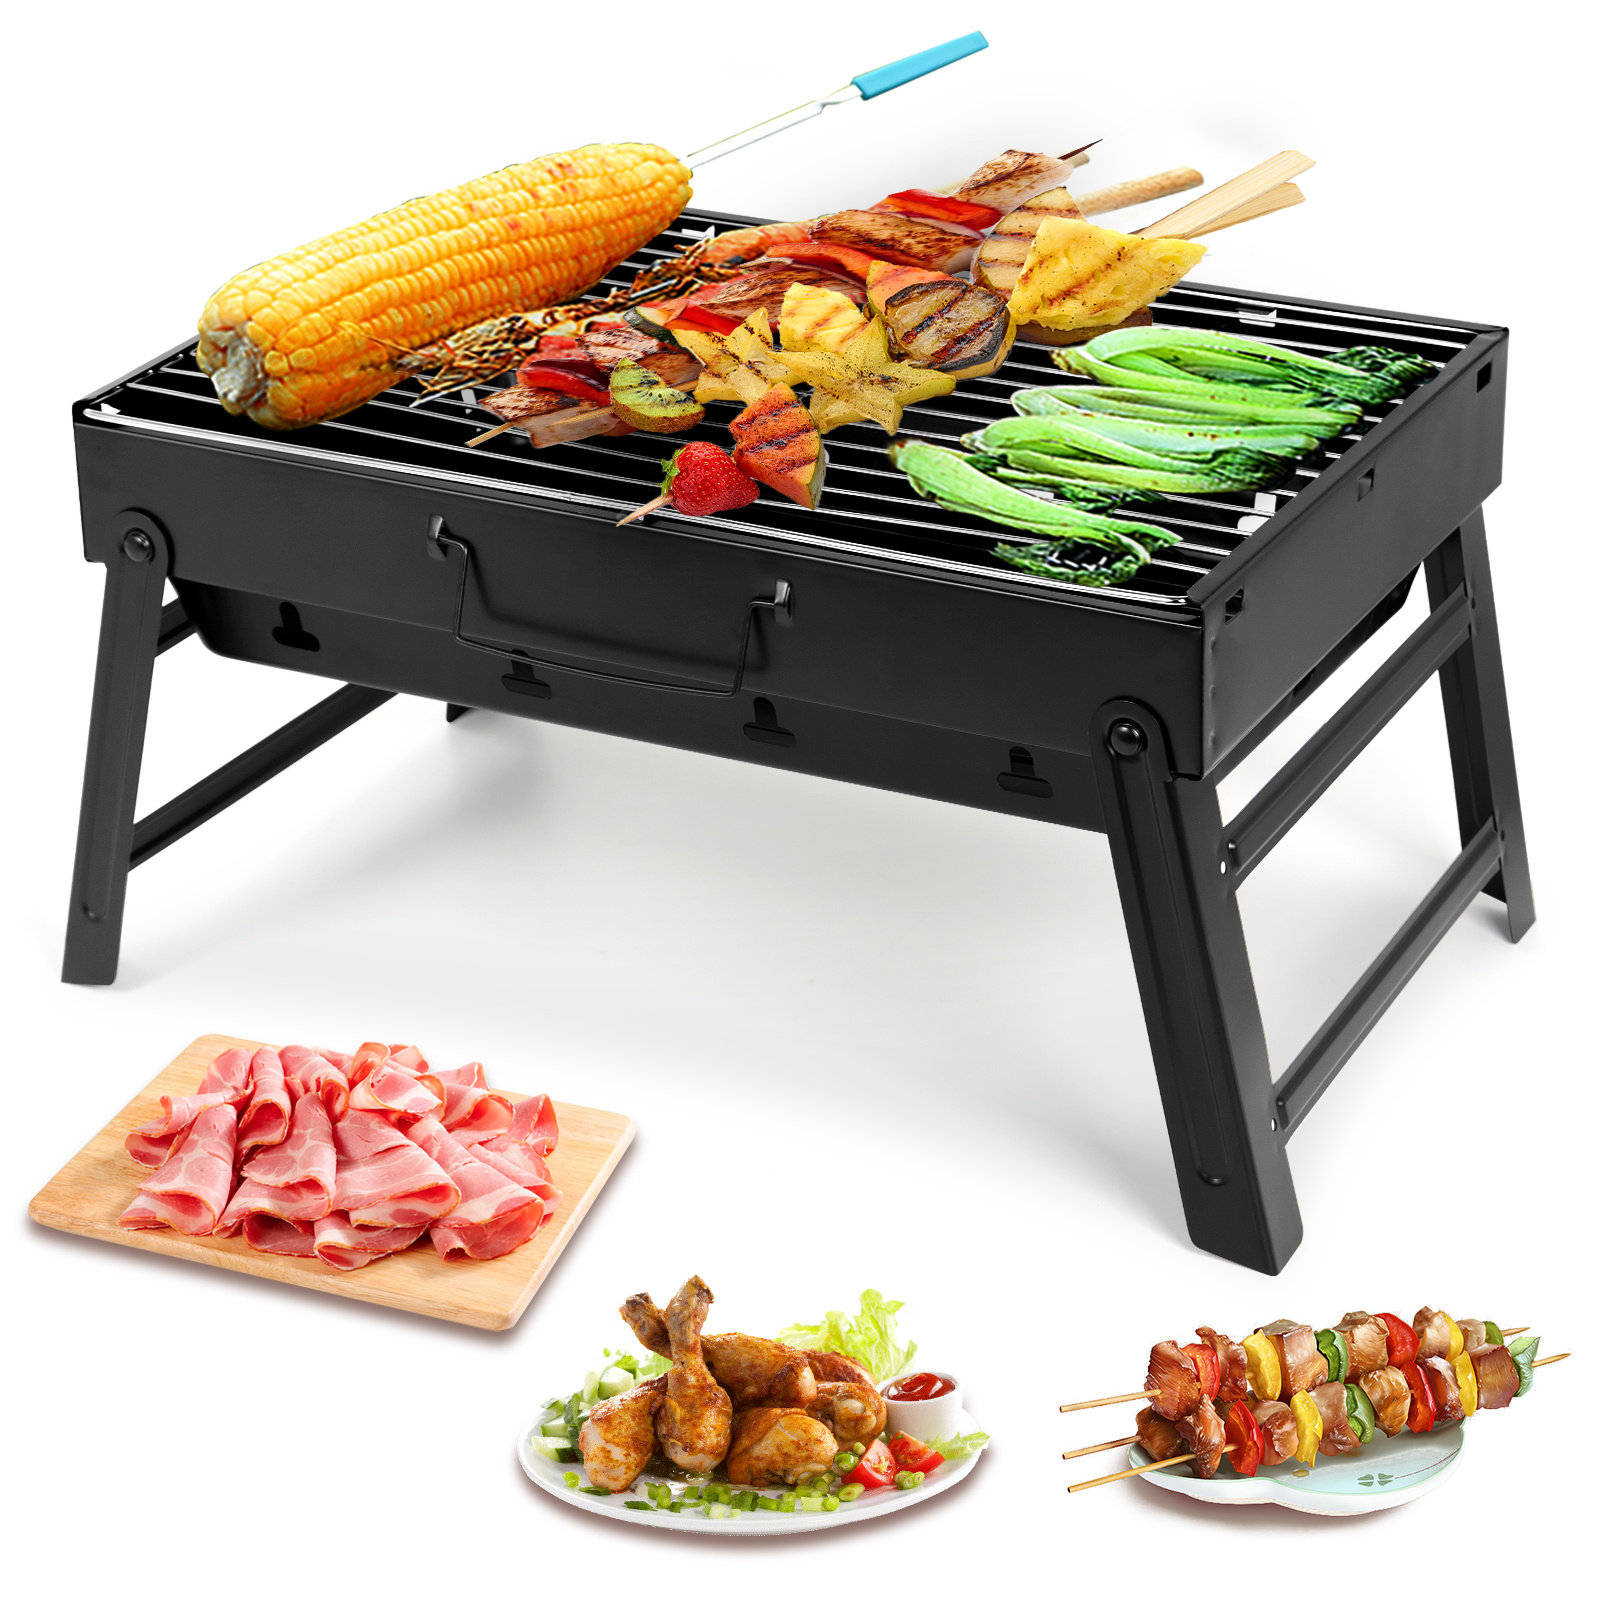  Lodge Steel Collapsible Outdoor Cooking Table, 16 Inch